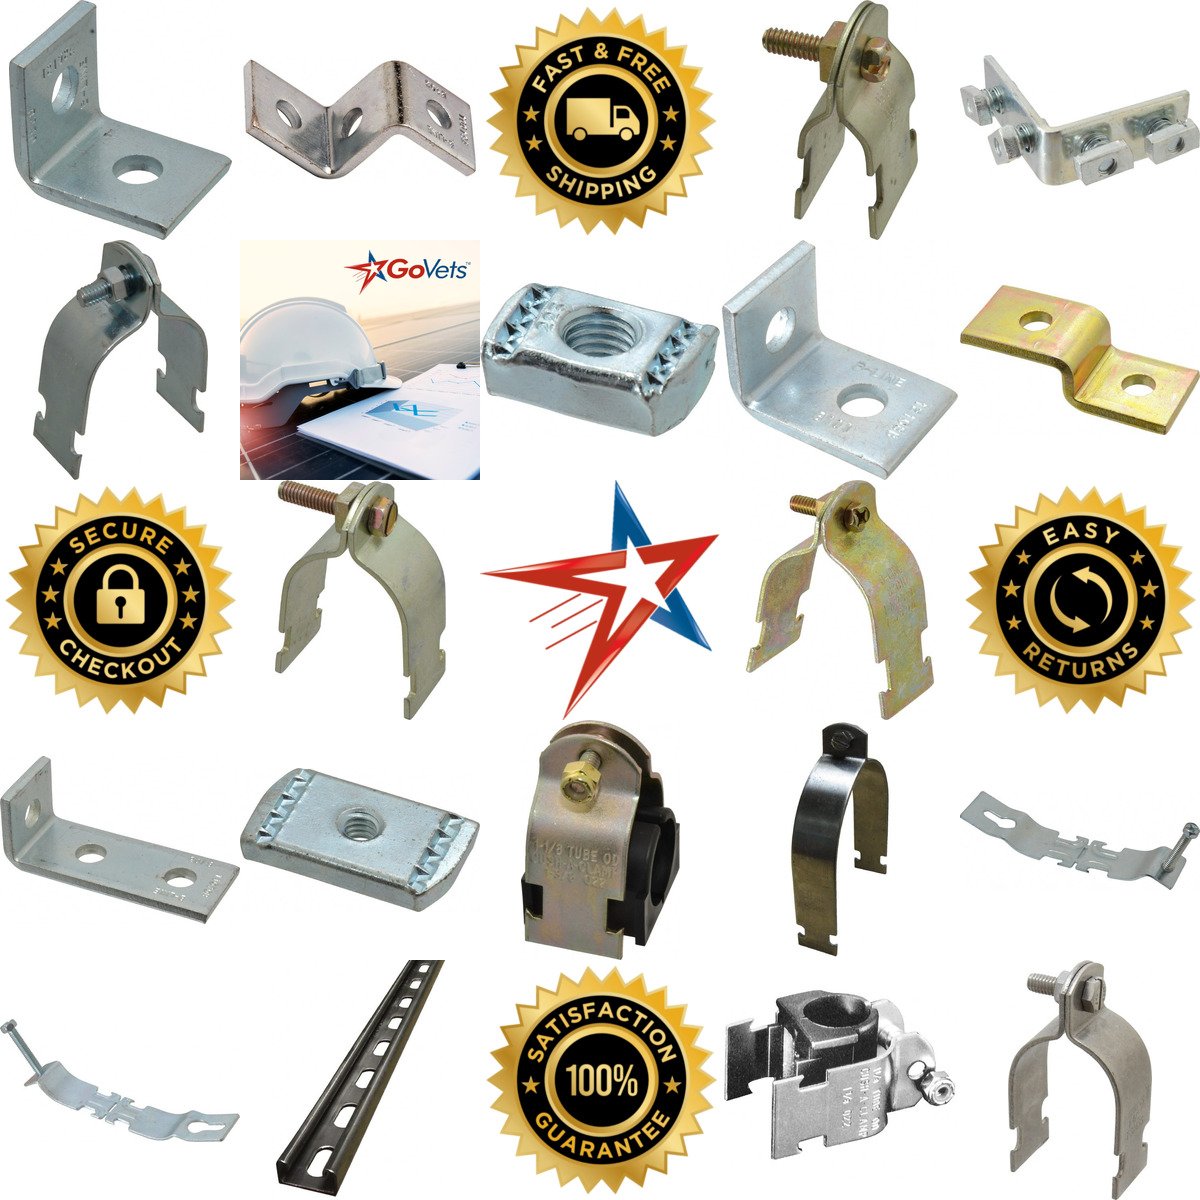 A selection of Framing Channels and Struts products on GoVets